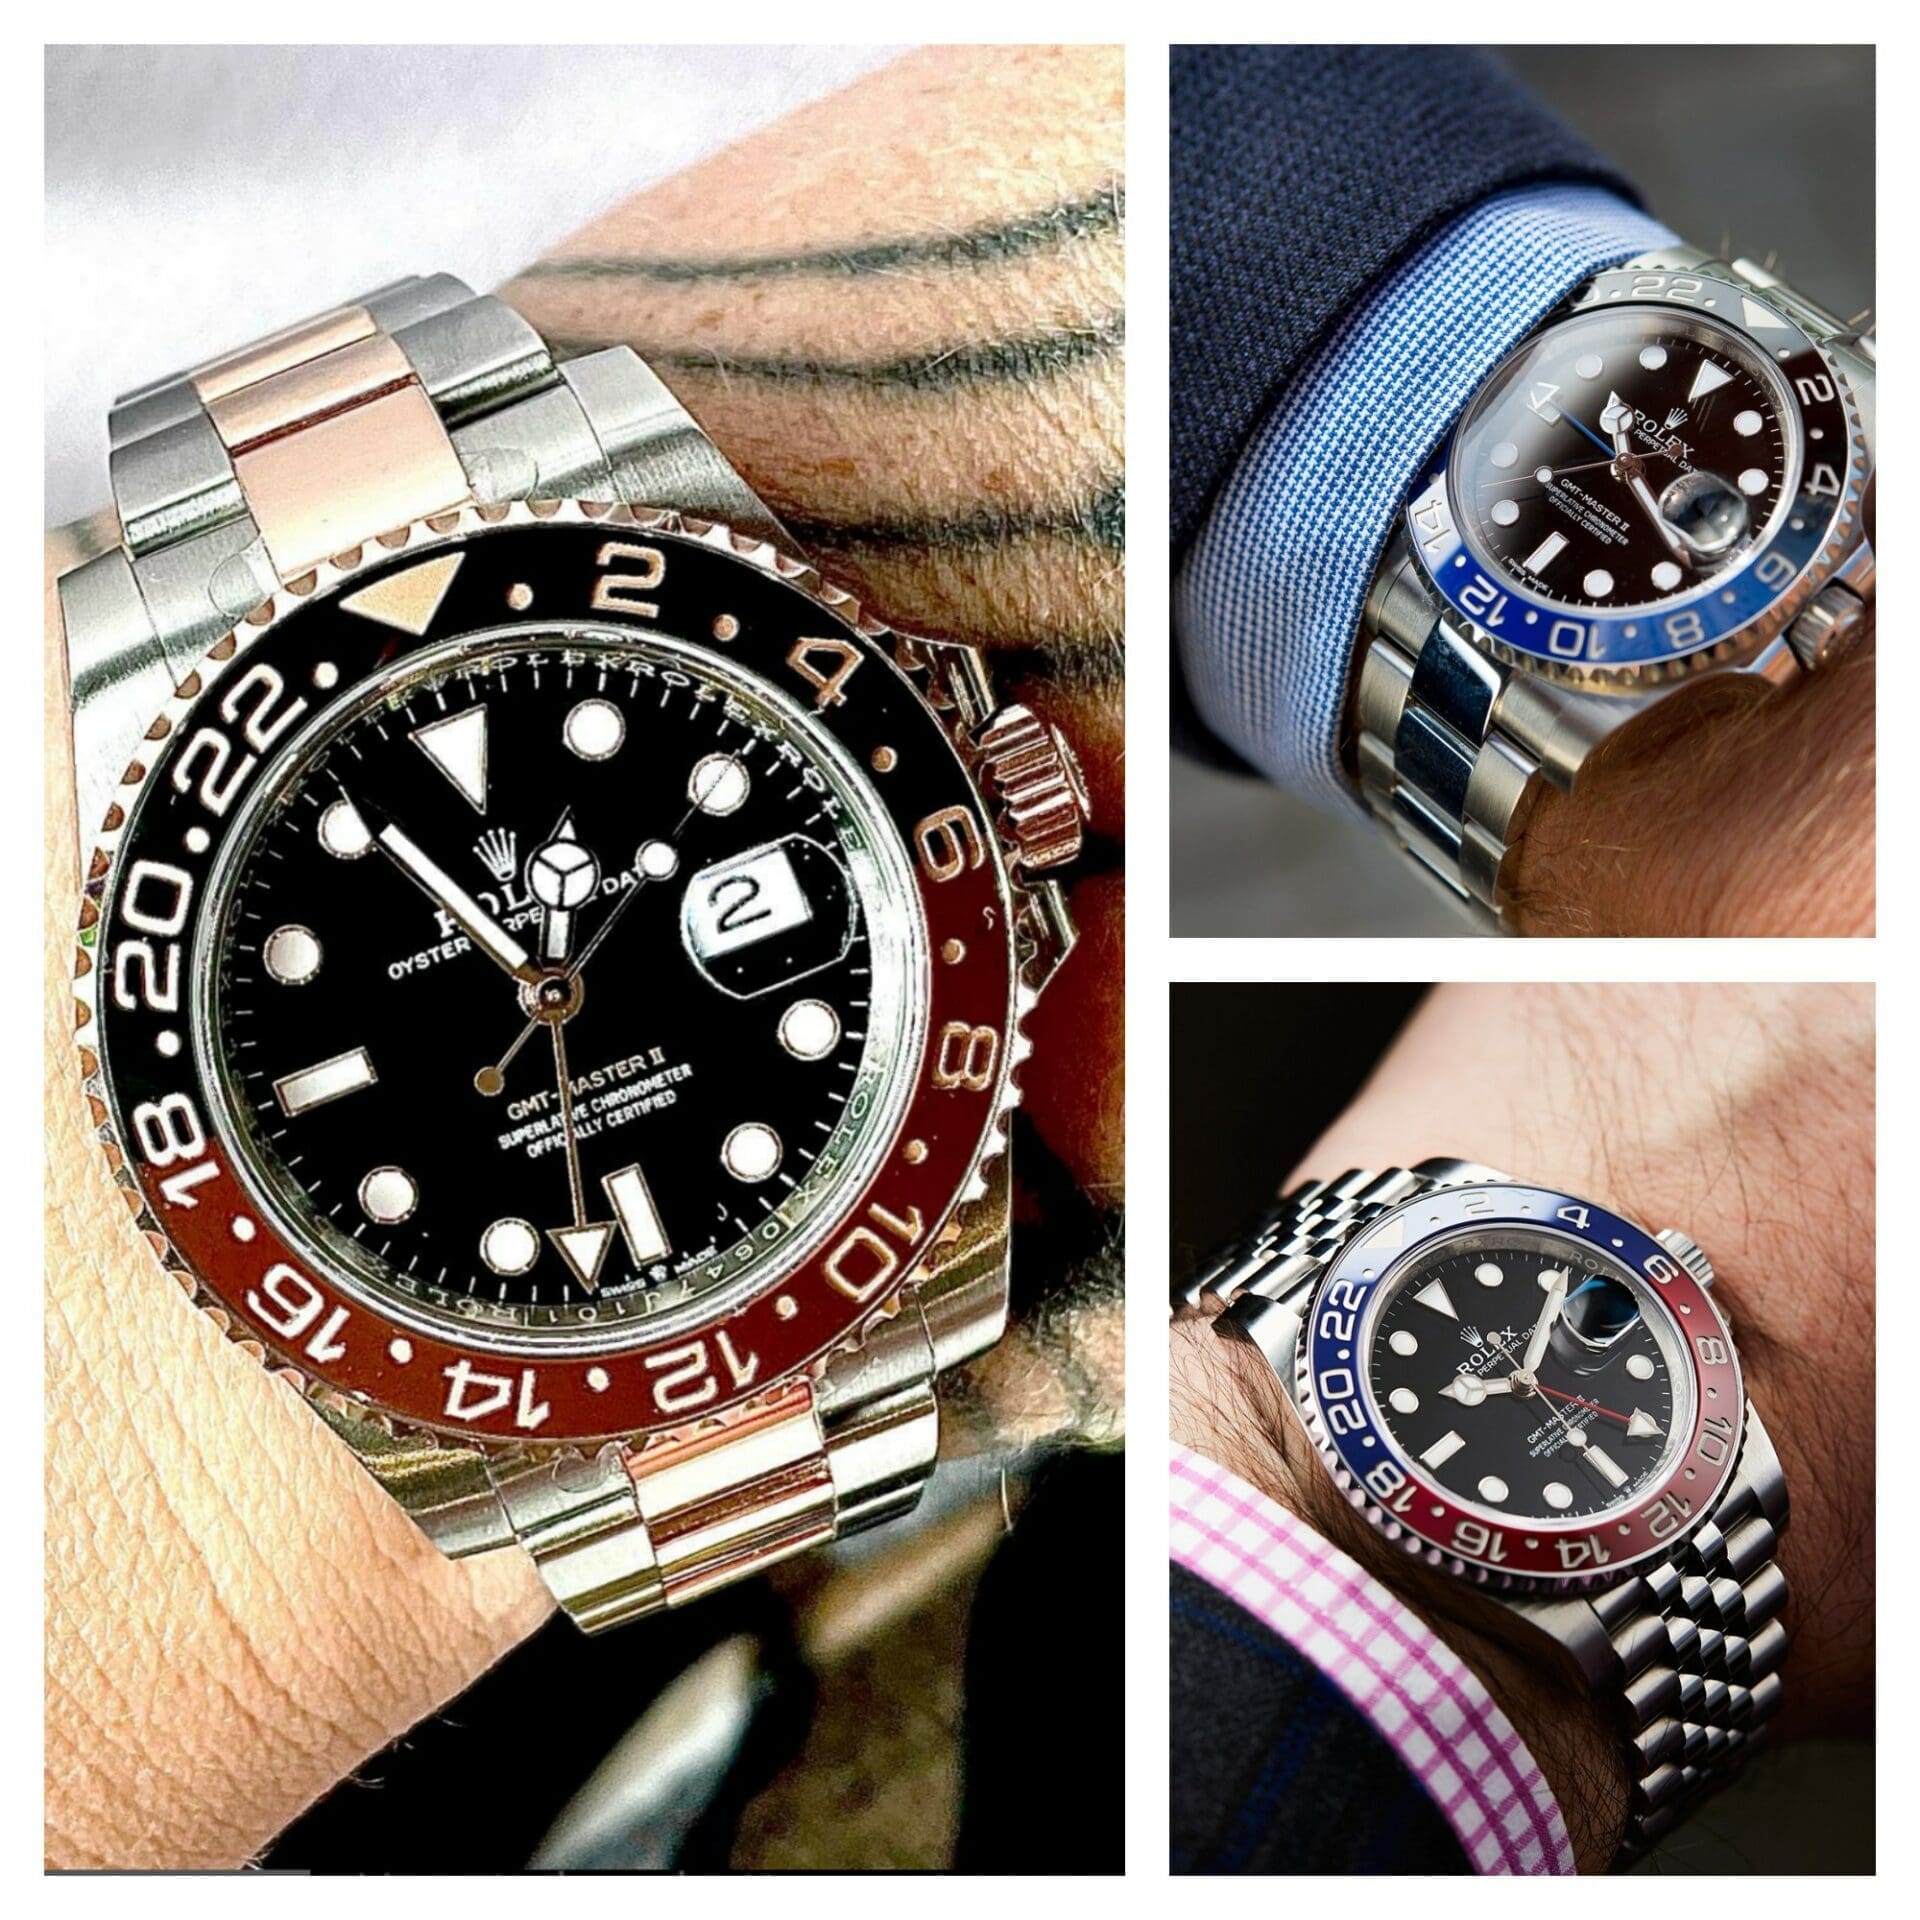 Ruminations on my Rolex GMT journey that took me from Batman to Root Beer with a few diversions along the way